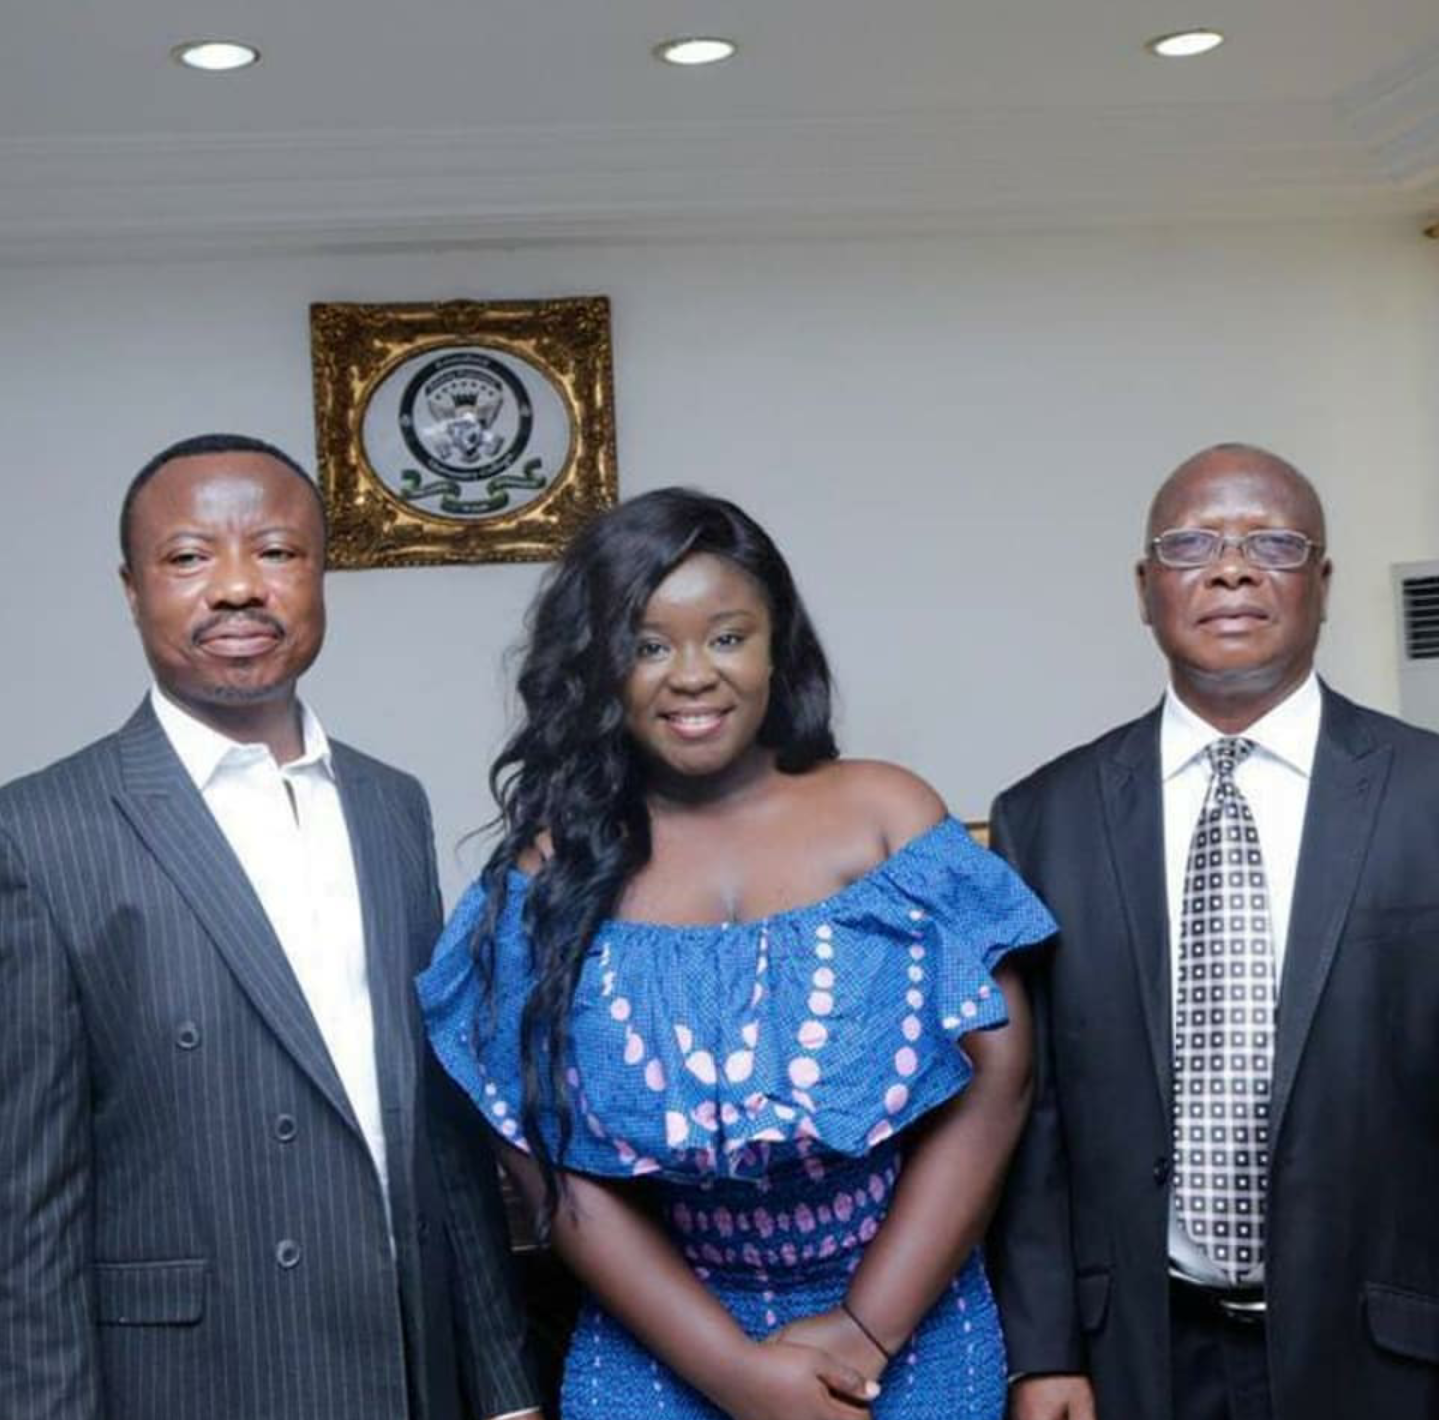 Maame Serwaa posed with officials of Knutsford University college